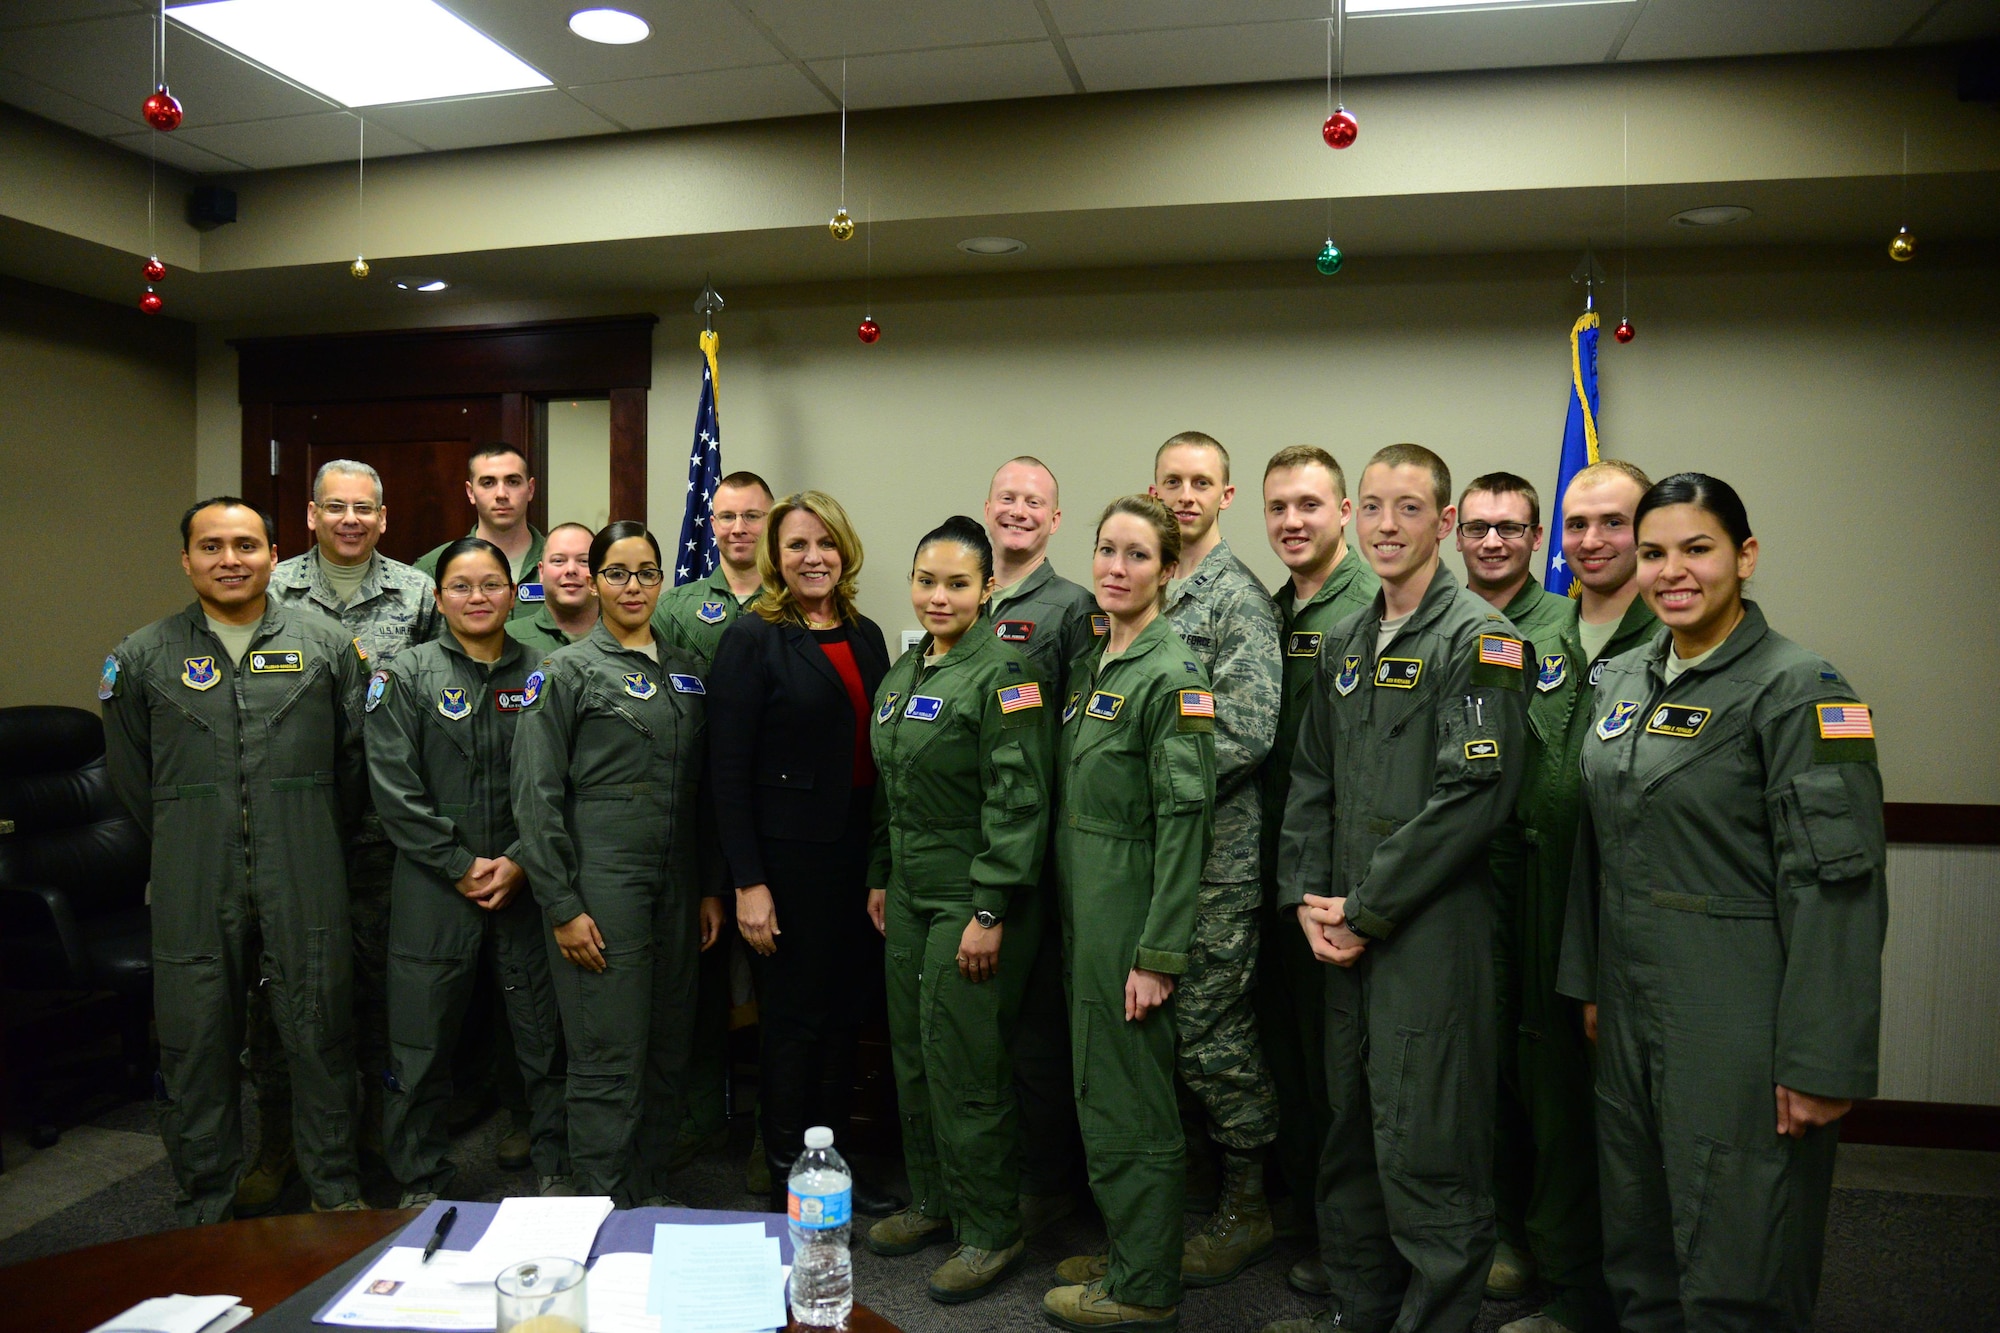 Secretary of the Air Force Honorable Deborah Lee James poses for a photo with missileers at Malmstrom Air Force Base, Mont., Jan. 5, 2017. During her visit, James discussed improvements in morale, innovation and modernization with company grade officers in operations about what changes still need to be considered to improve the nuclear enterprise. (U.S. Air Force photo/Airman 1st Class Magen M. Reeves)